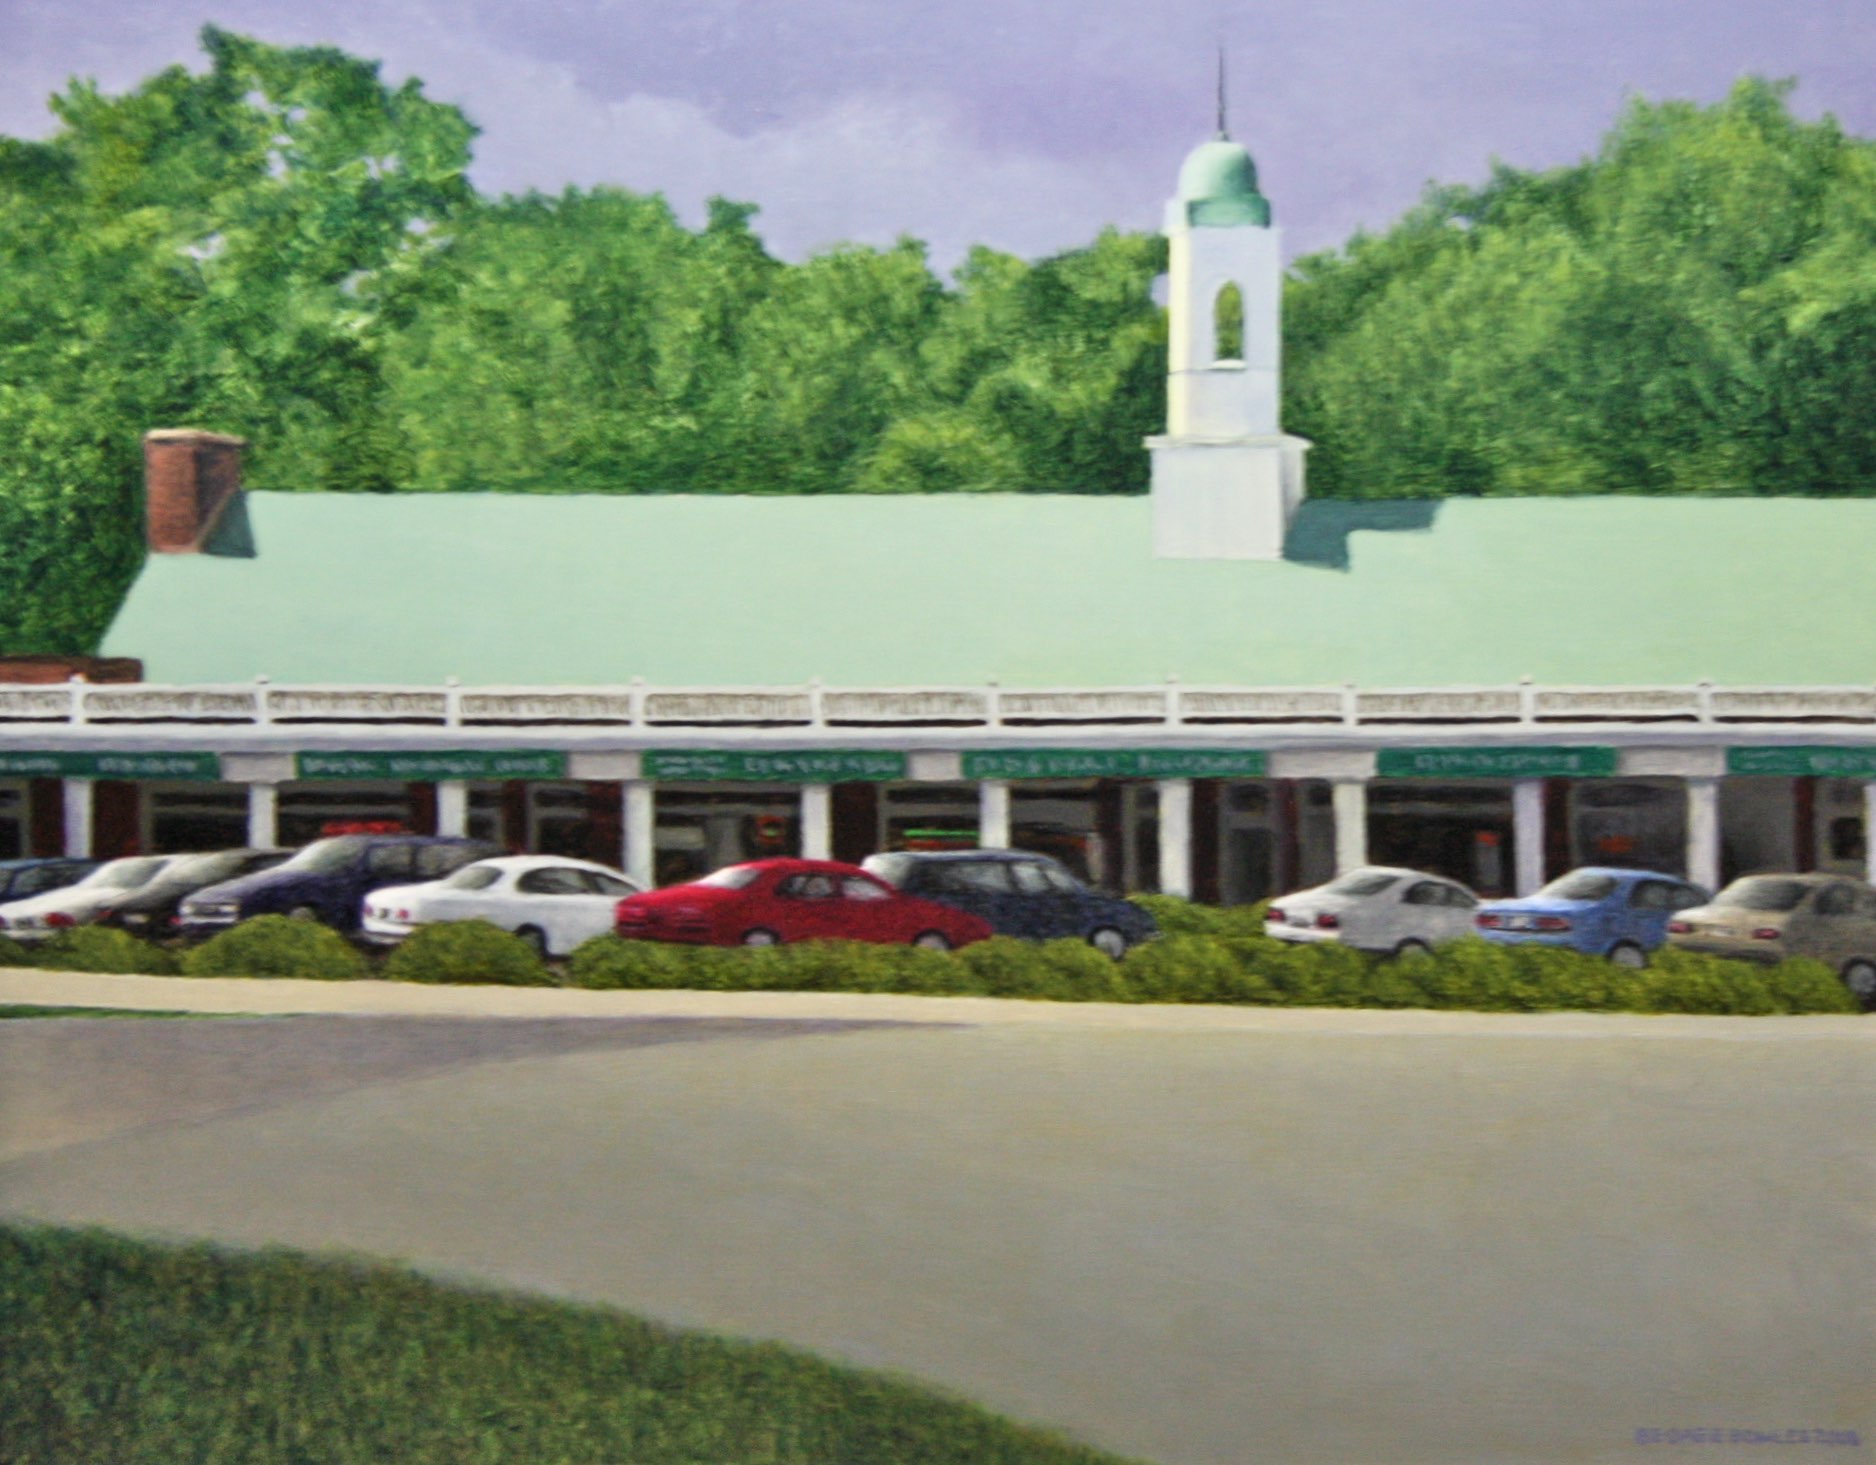 "Arlington Forest Shopping Center"
16" x 20" 
Alkyd on board
$ 1500